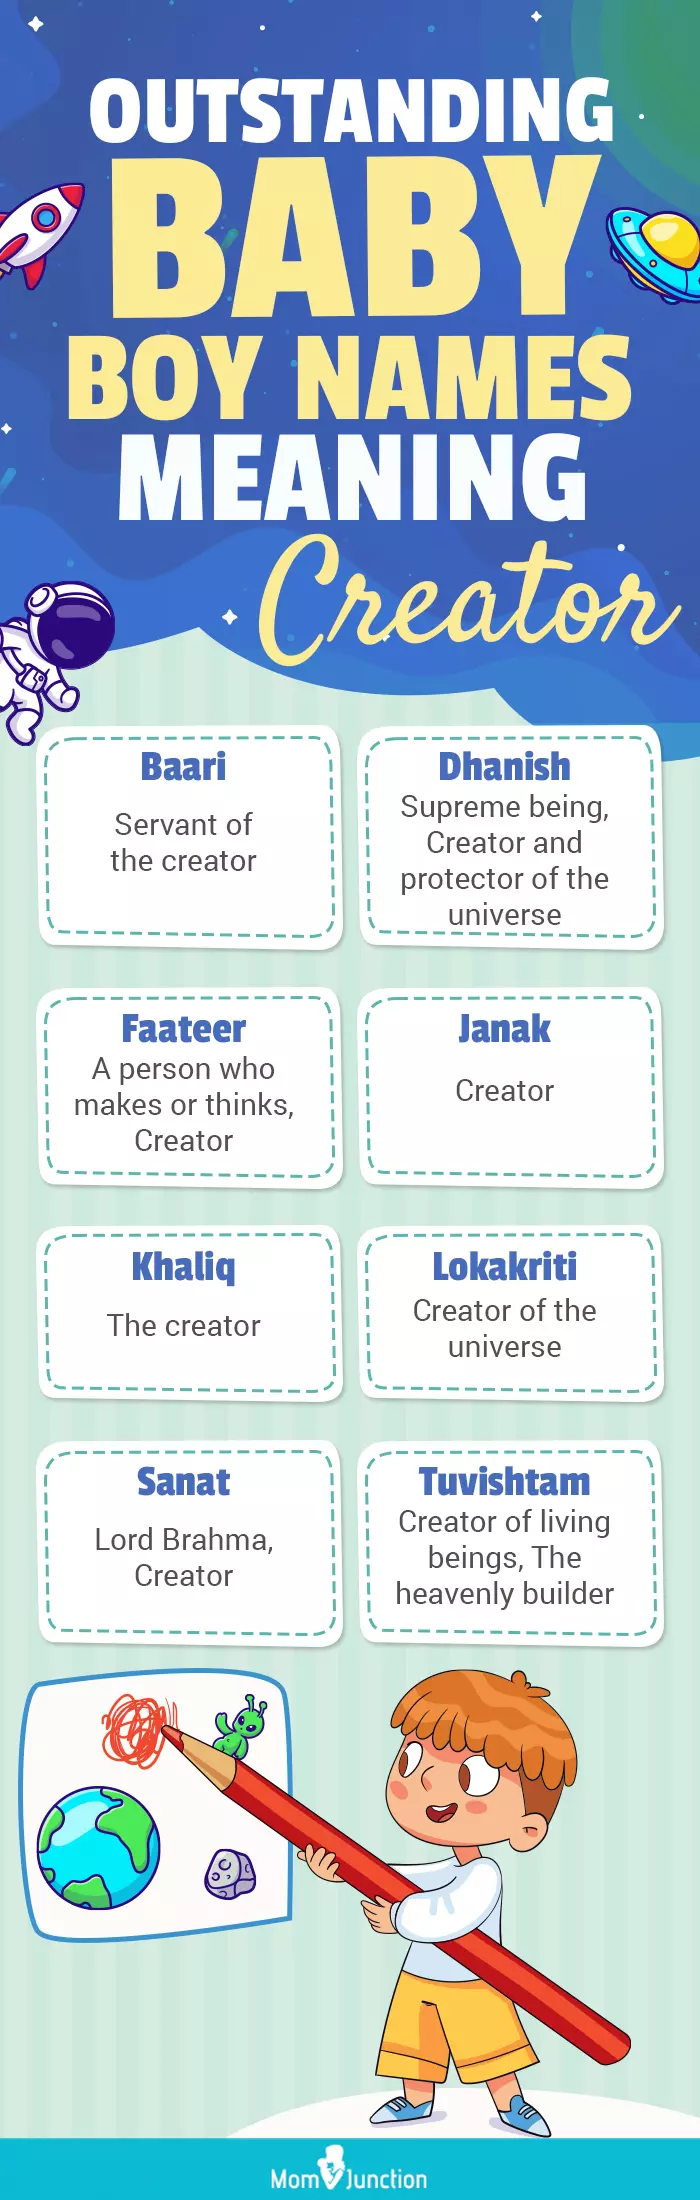 Outstanding Baby Boy Names Meaning Creator (infographic)